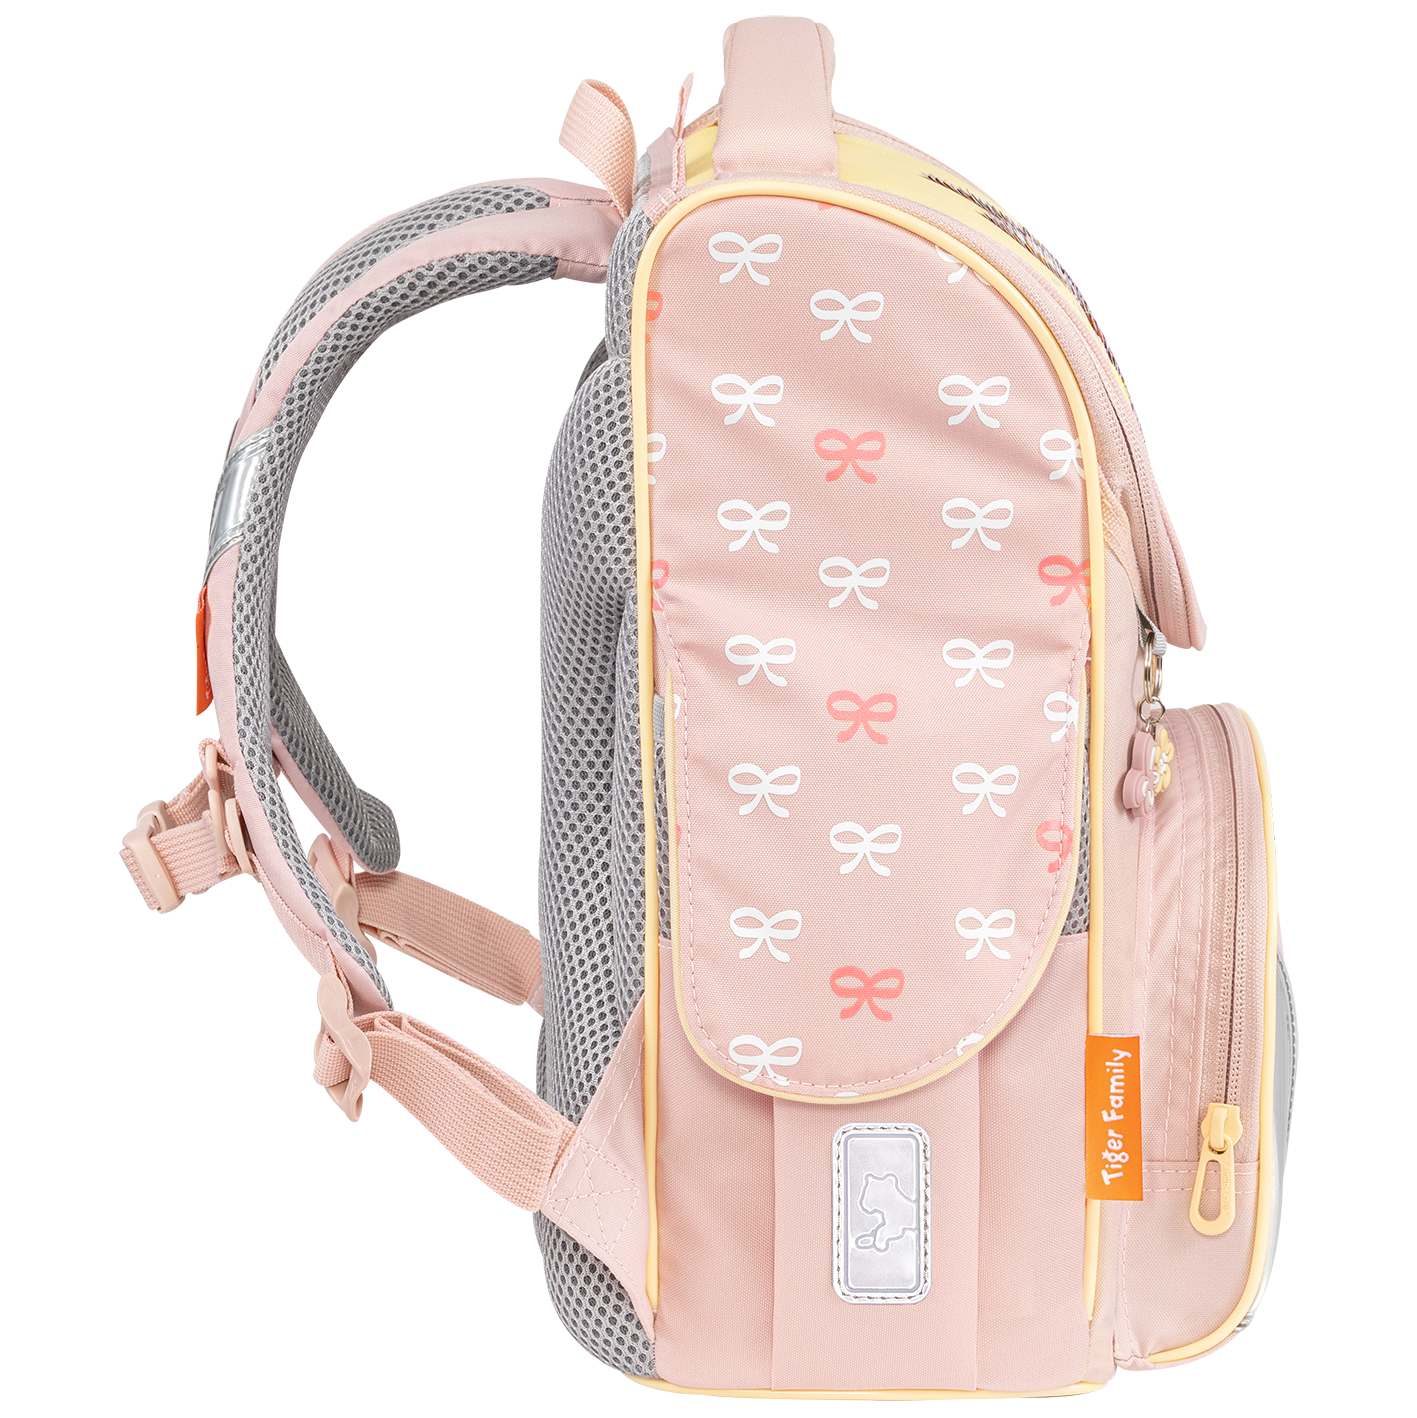 Cặp Chống Gù Nature Quest Schoolbag Pro - Bows and Bunny - Sequins - Tiger Family TGNQ-105A